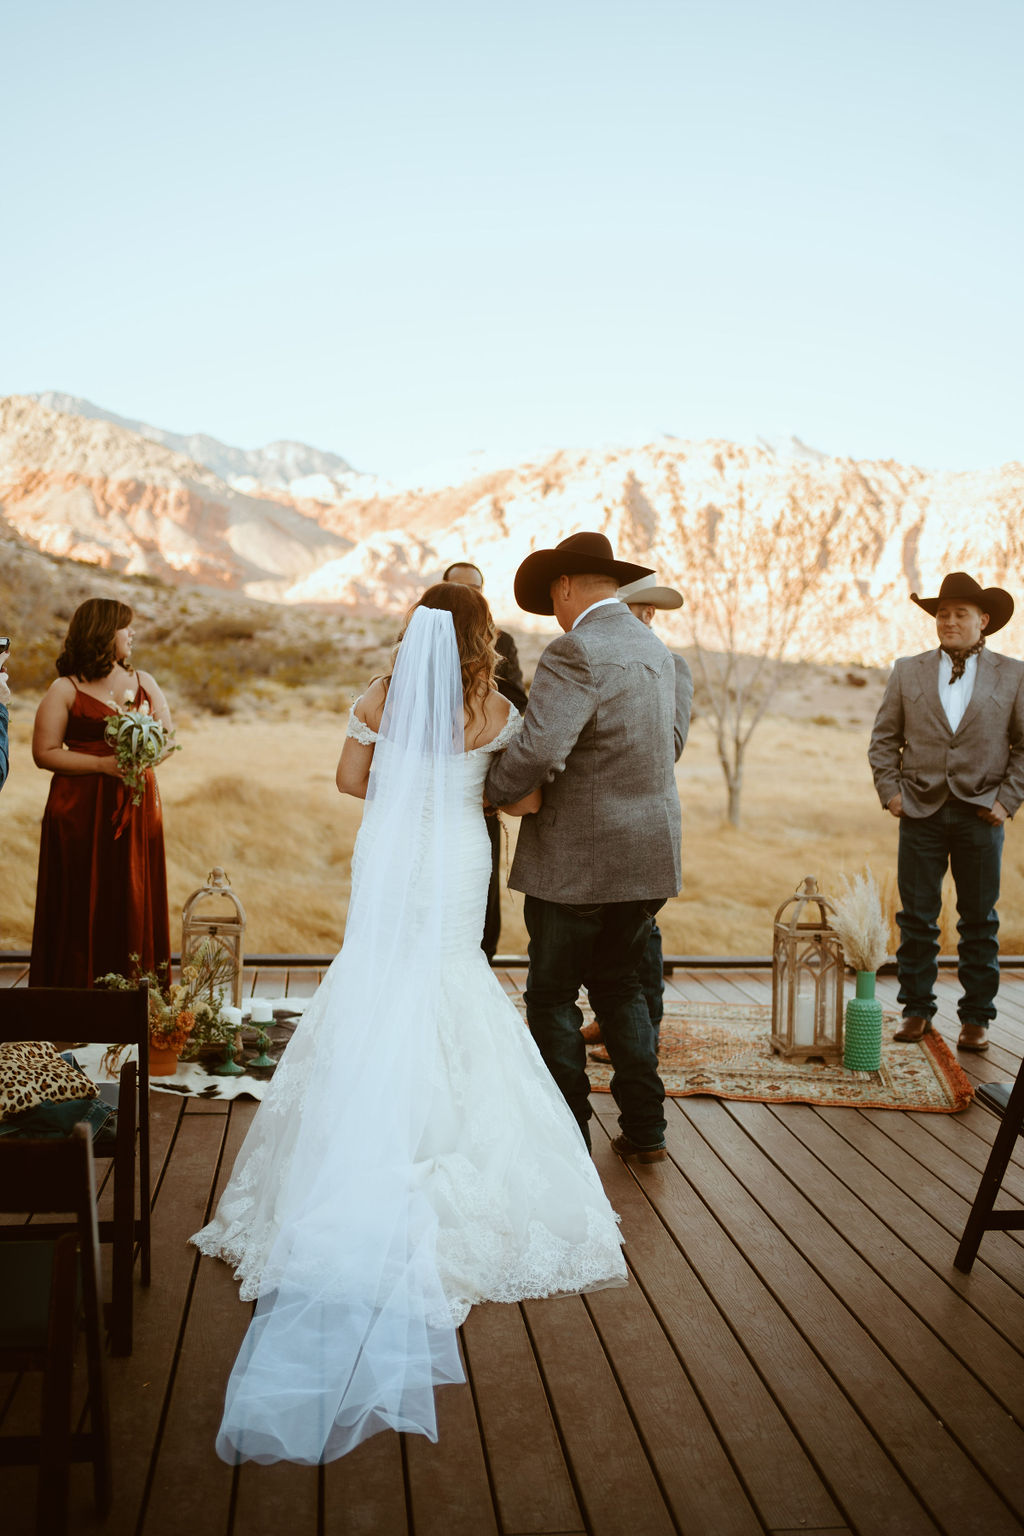 Bride in Veil and Mermaid Dress Arriving at Altar during Western Inspired Turquoise Boho Elopement 